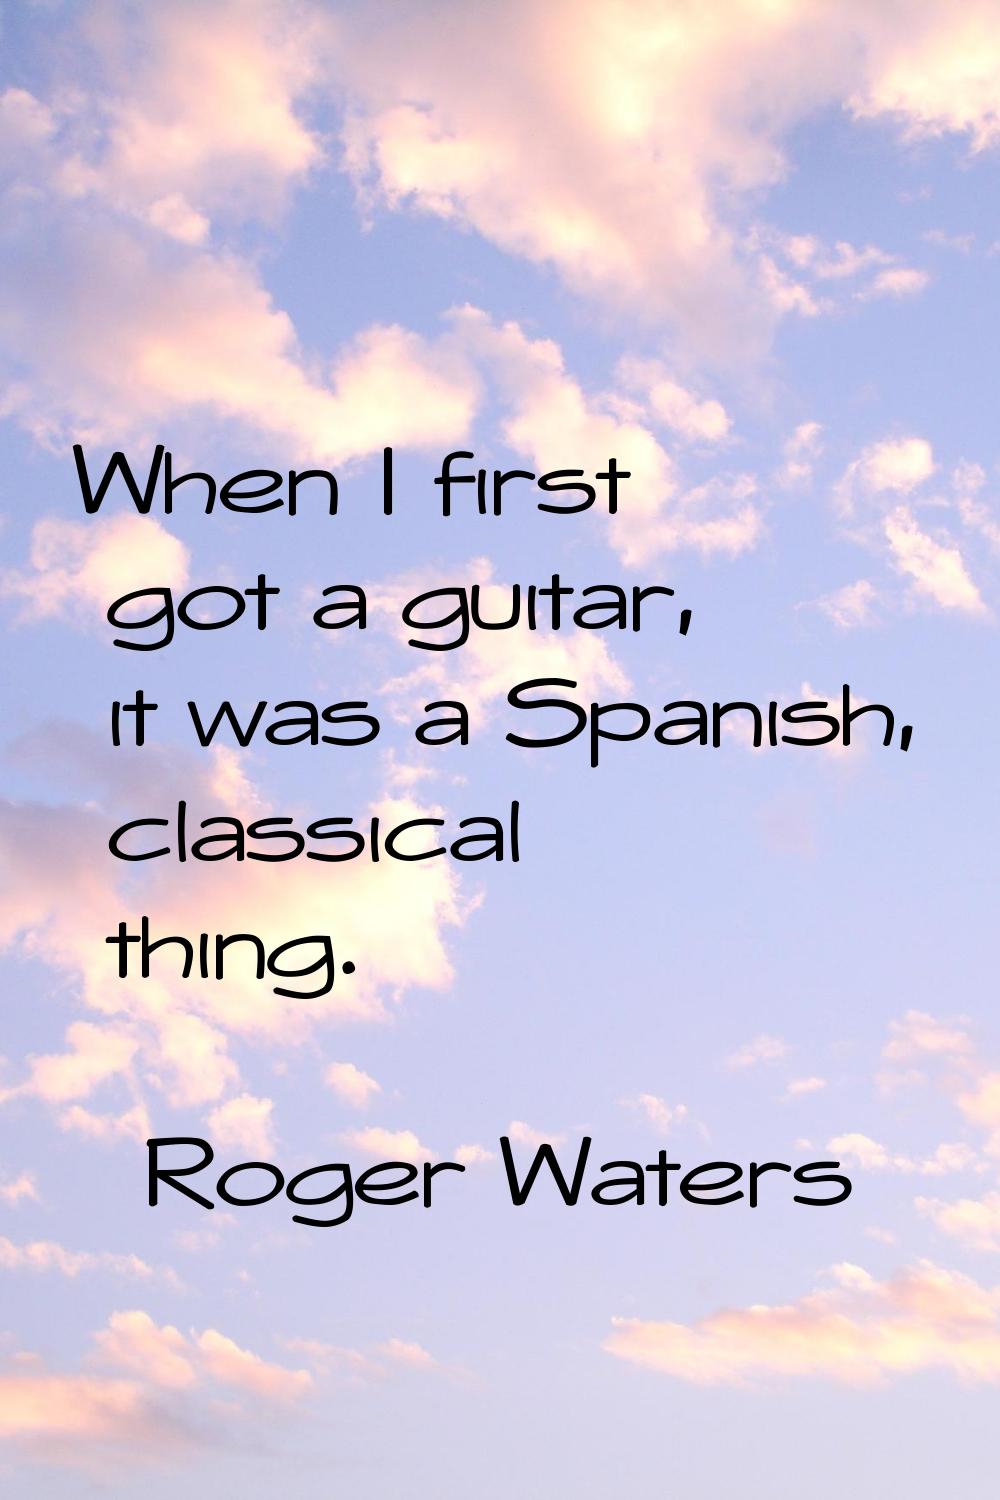 When I first got a guitar, it was a Spanish, classical thing.